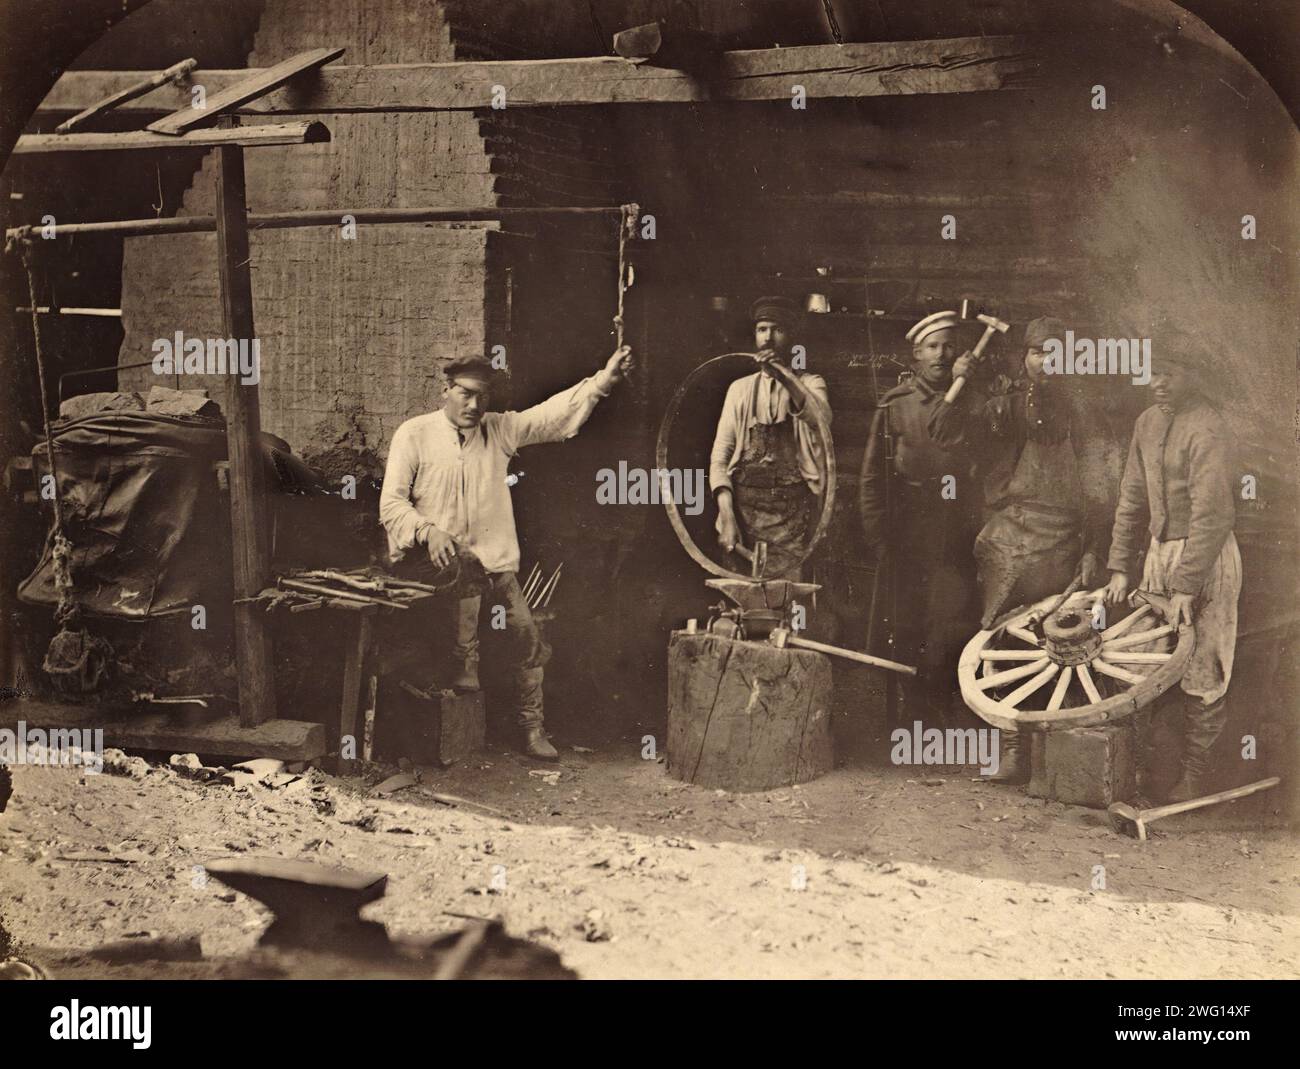 Hard Labor Convicts Working in the Blacksmith's Shop, 1891. One of 74 views taken in July 1891 and contained in the albumTipy i vidy Nerchinskoi katorgi (Views and inhabitants of Nerchinsk hard labor camps). The Nerchinskkatorgawas part of the katorga (forced labor) system of imperial Russia, located in the province of Transbaikalia (present-day Zabaykal'skiy Kray), near the Russian border with China. The katorga was administered by the Ministry of Interior and included prisons at Akatuy, Kara, Aleksandrovsk, Nerchinskii Zavod, and Zerentuy, all of which are depicted in the album. National Lib Stock Photo